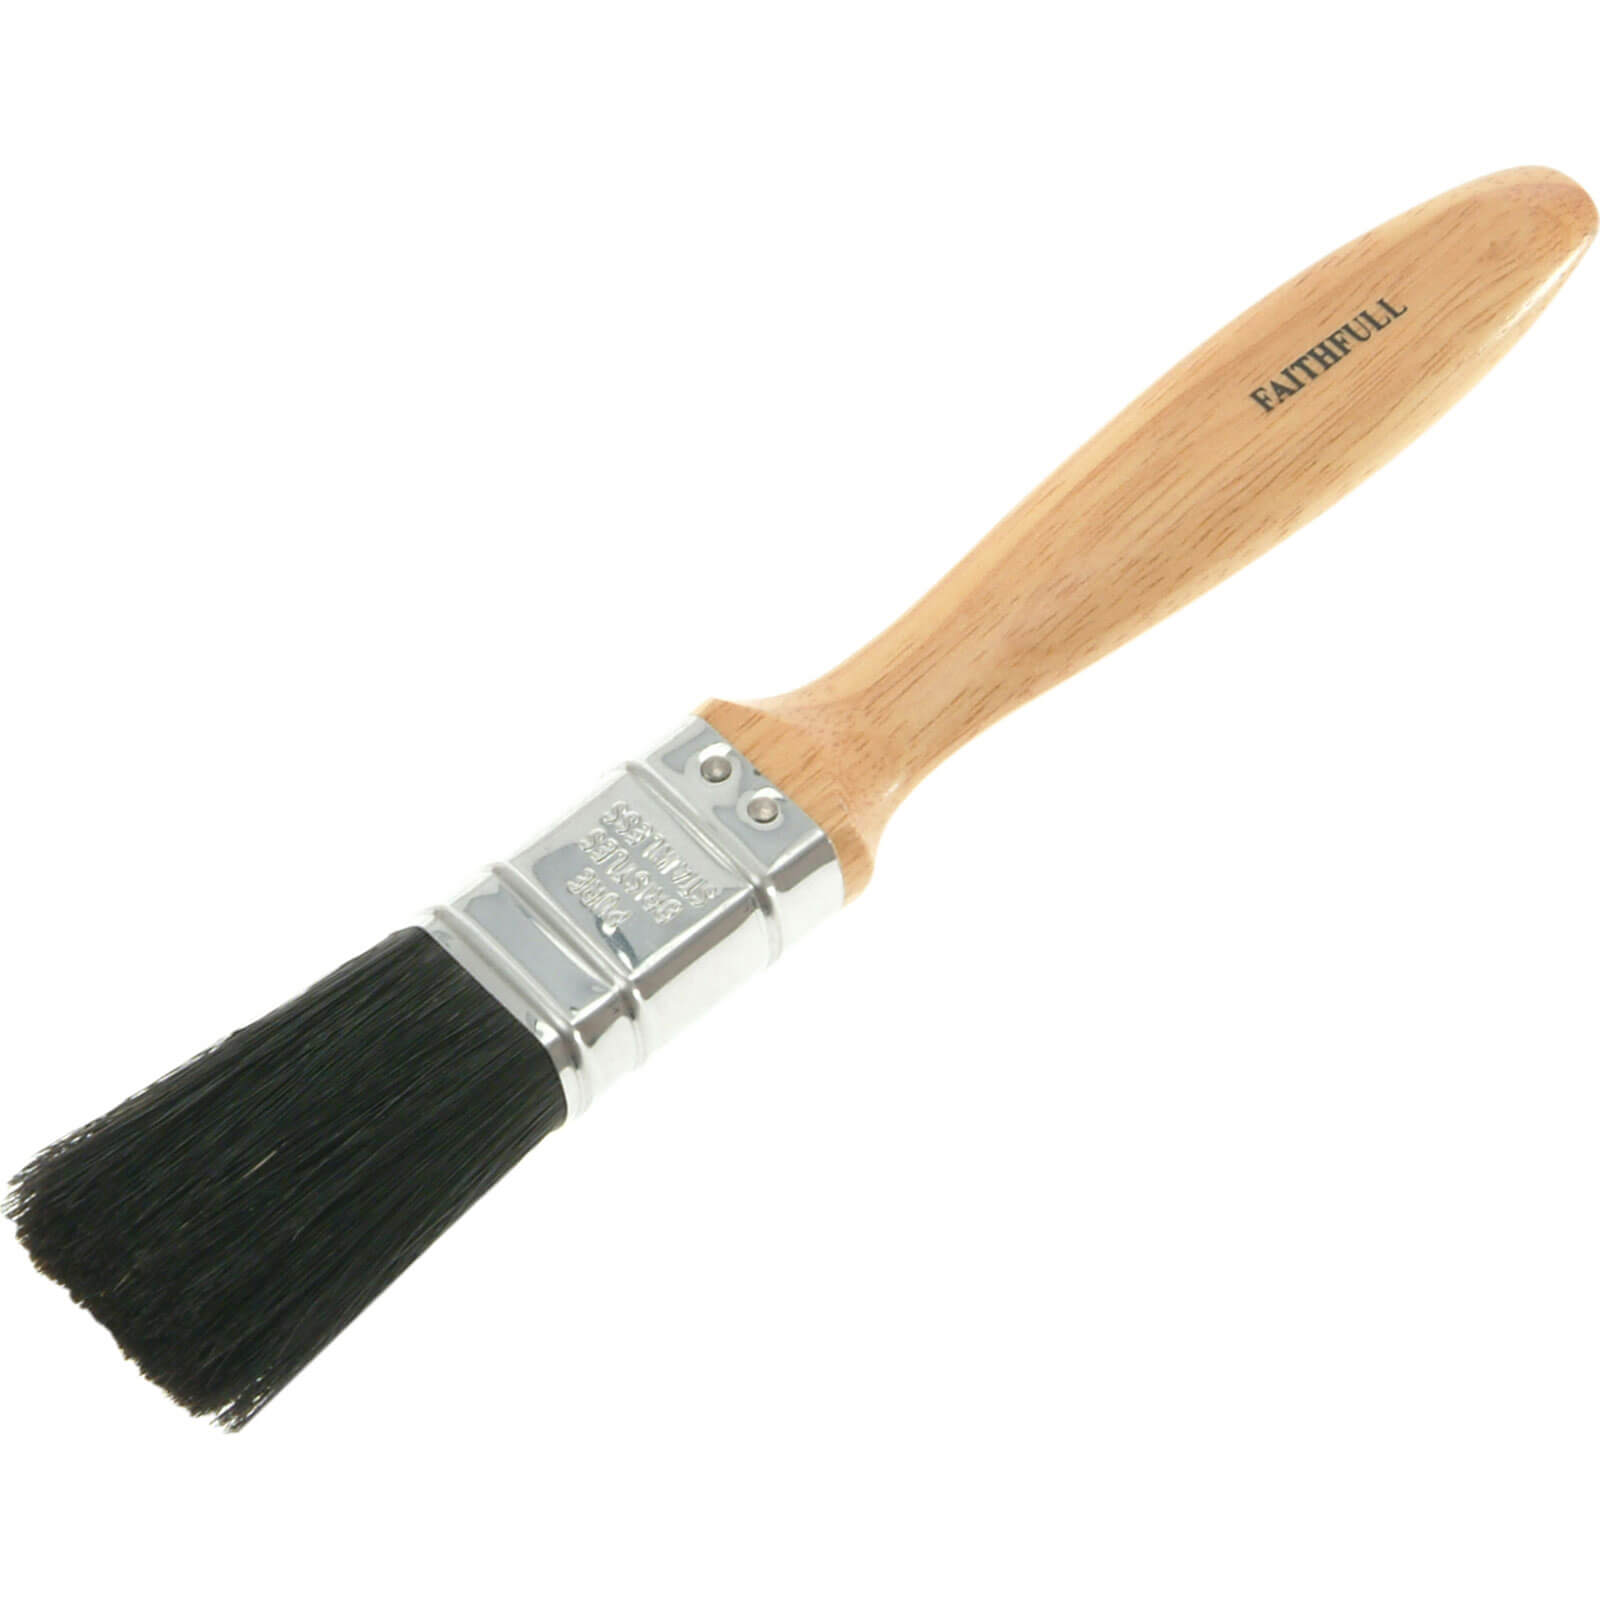 Photos - Putty Knife / Painting Tool Faithfull Contractors Paint Brush 25mm 